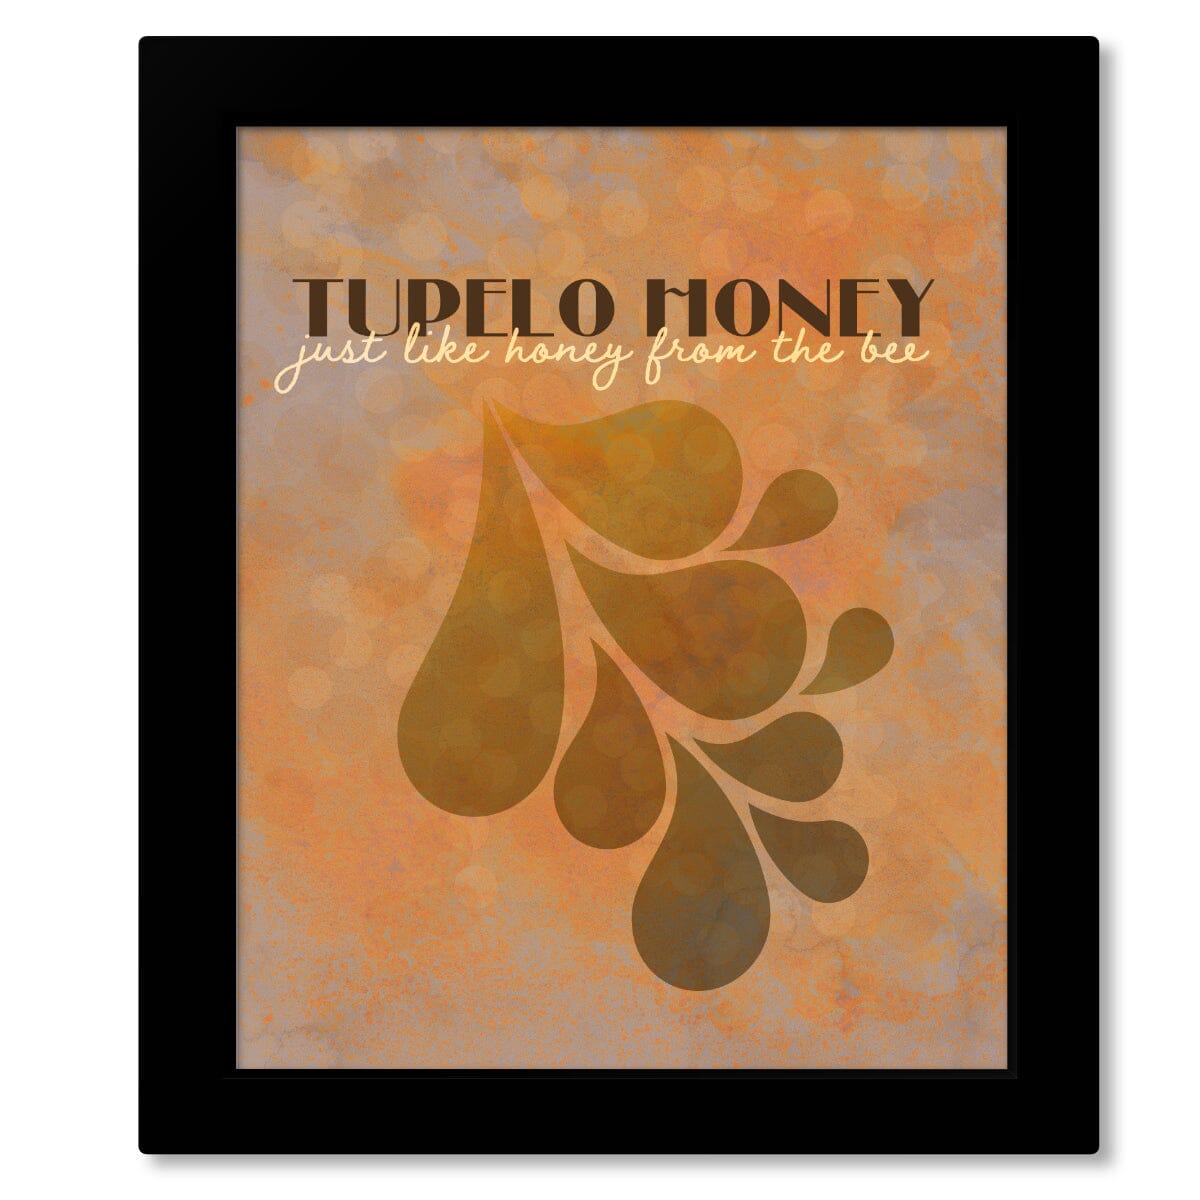 Tupelo Honey by Van Morrison - Rock Music Song Lyric Art Song Lyrics Art Song Lyrics Art 8x10 Framed Print (without mat) 